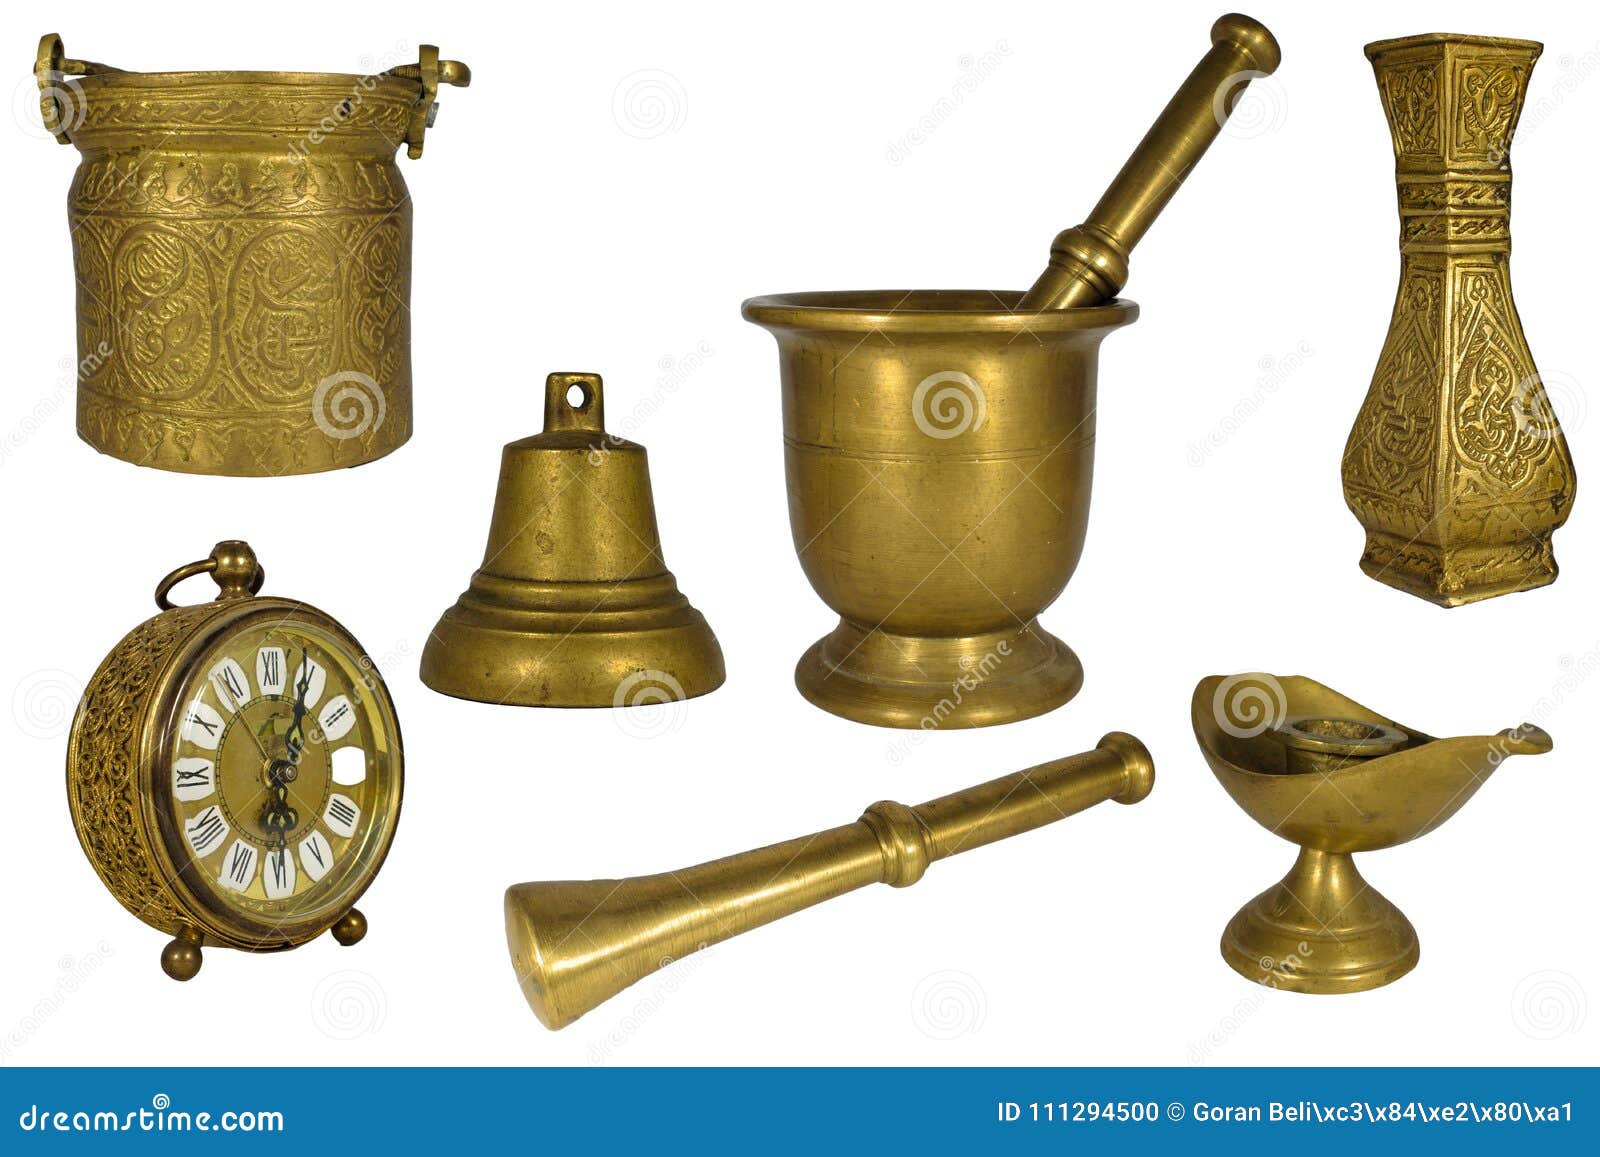 Beautiful Set or Collection of Vintage Brass or Golden Decorative